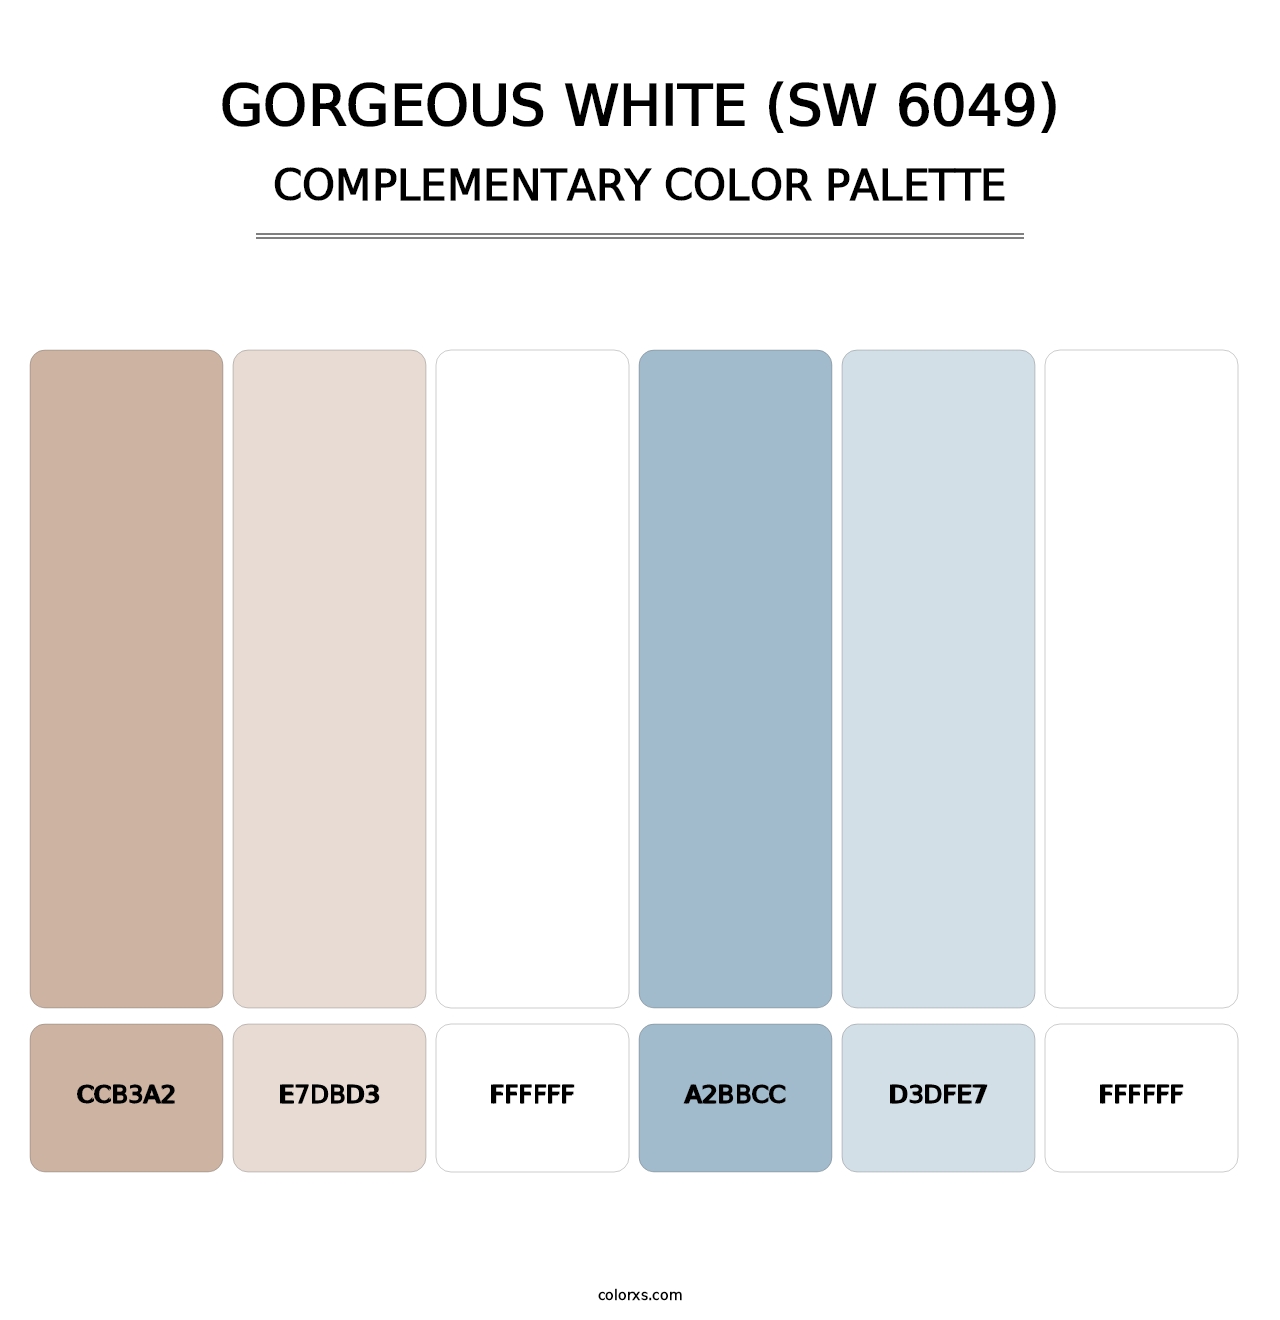 Gorgeous White (SW 6049) - Complementary Color Palette